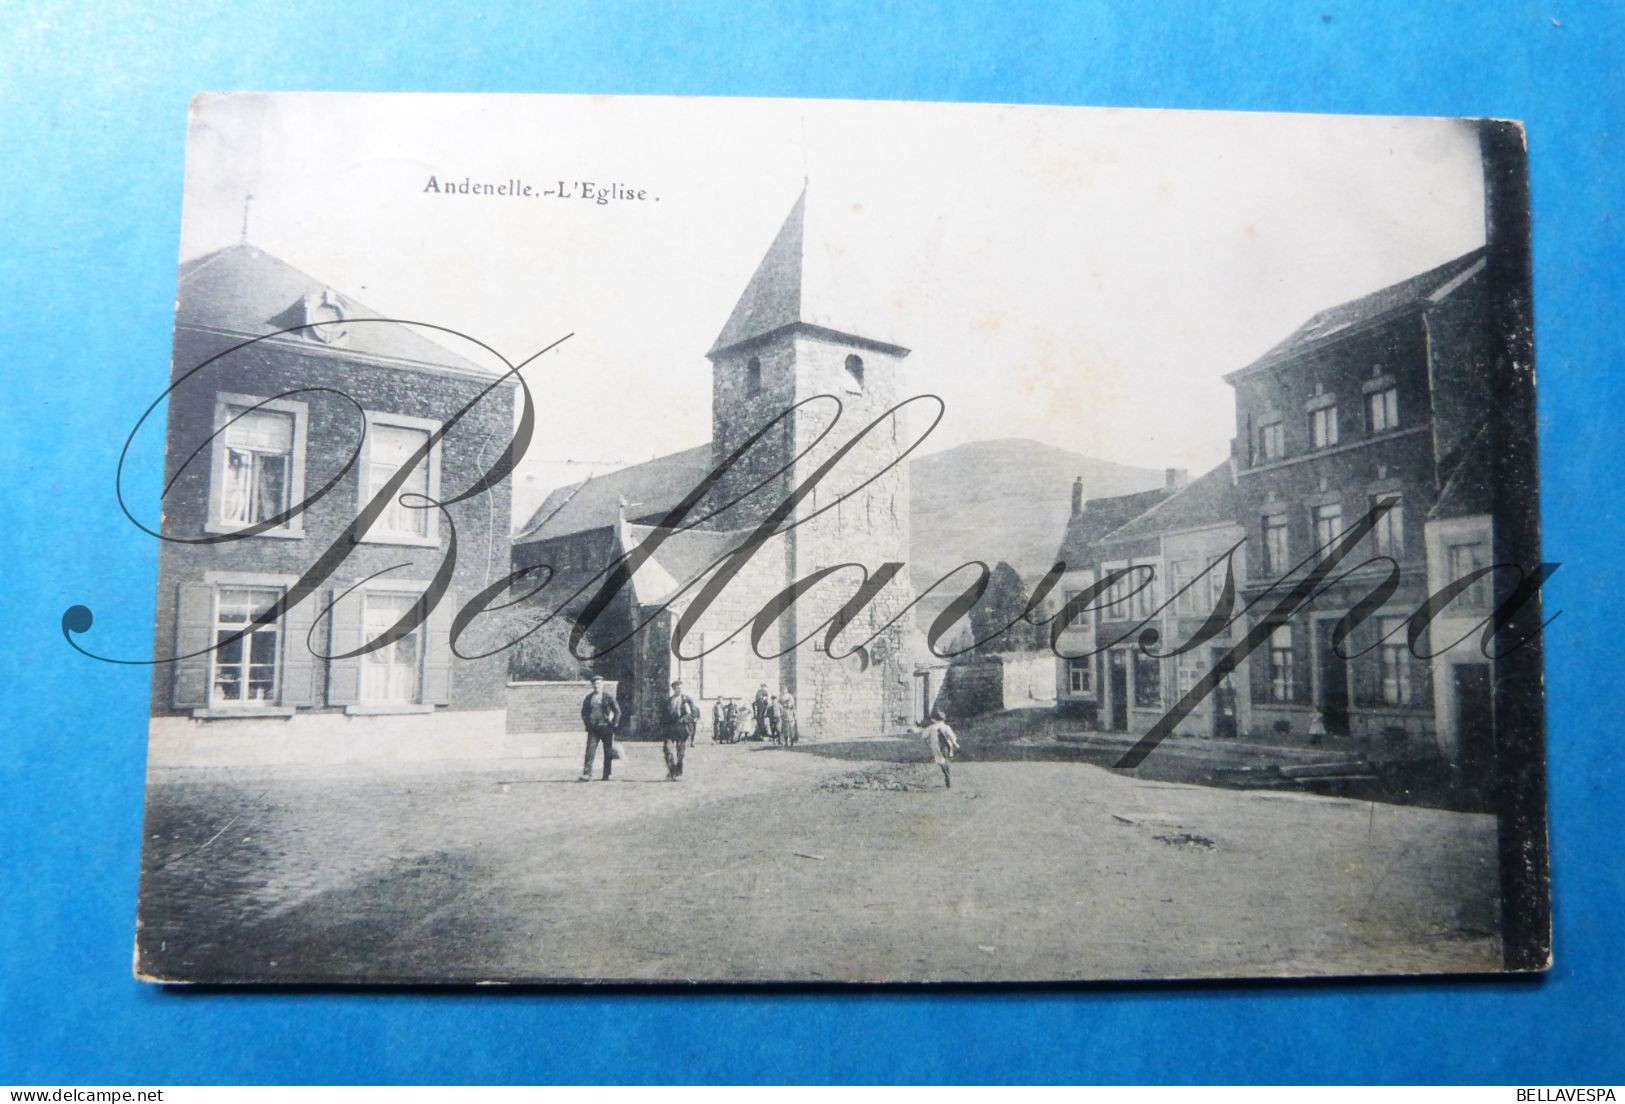 Andenelle Eglise Andenne 1912 - Andenne